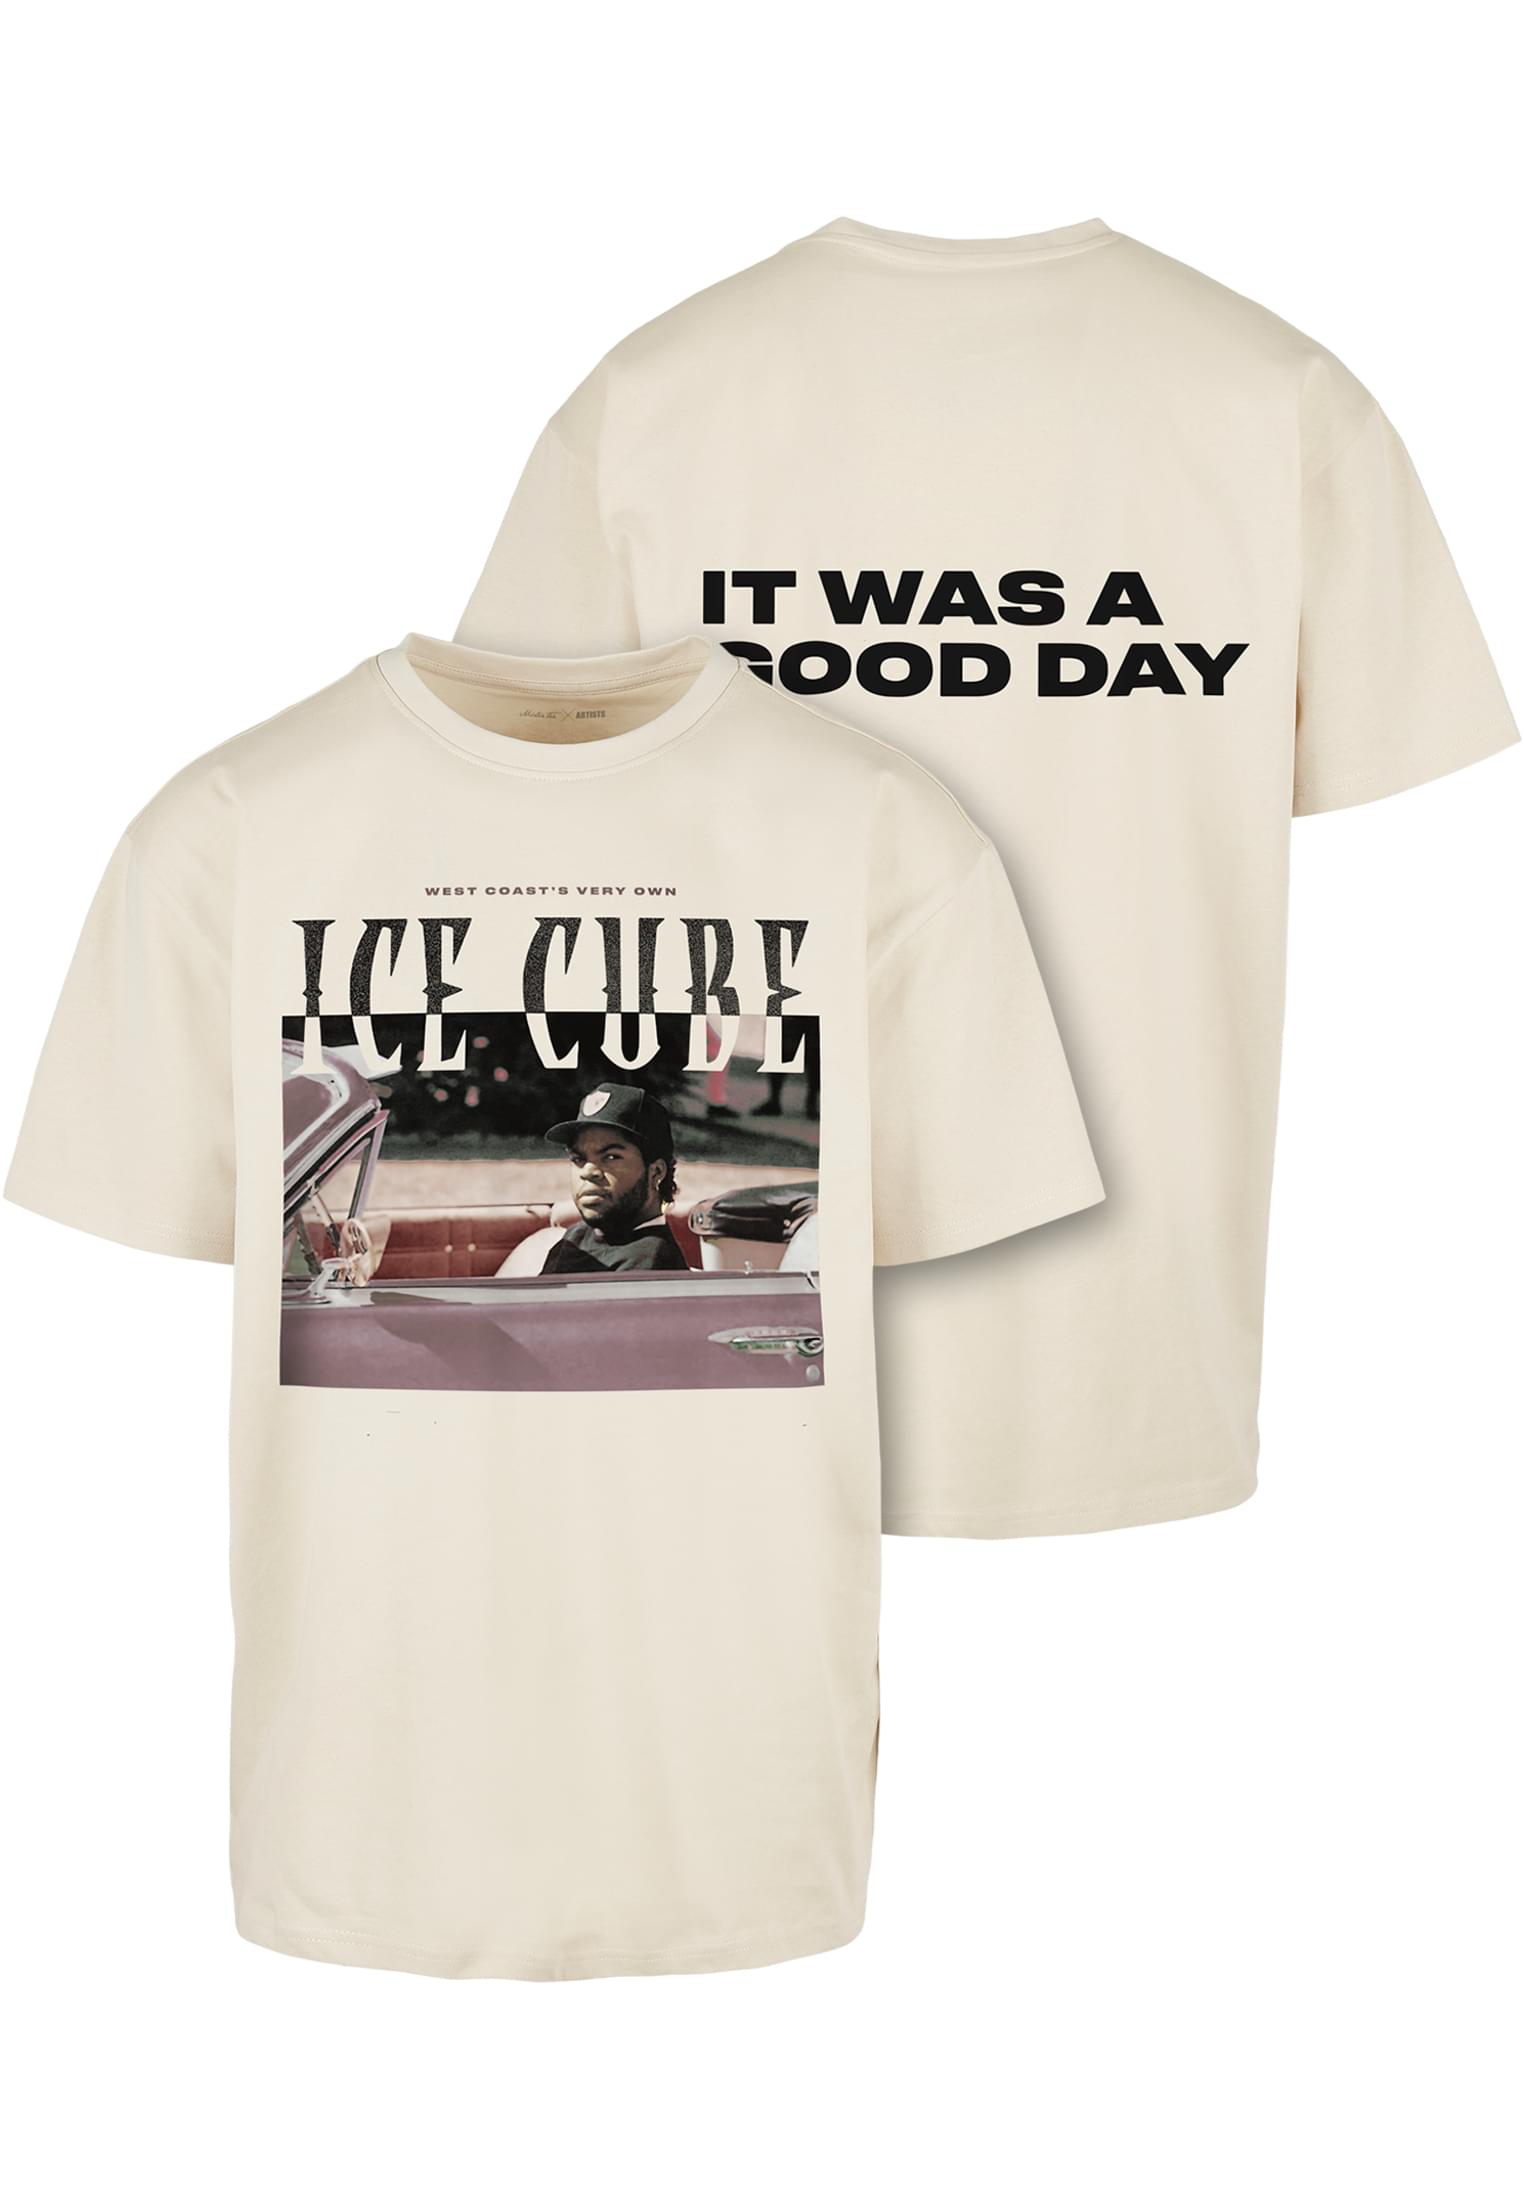 Ice Cube It's a Good Day Oversize Tee Sand